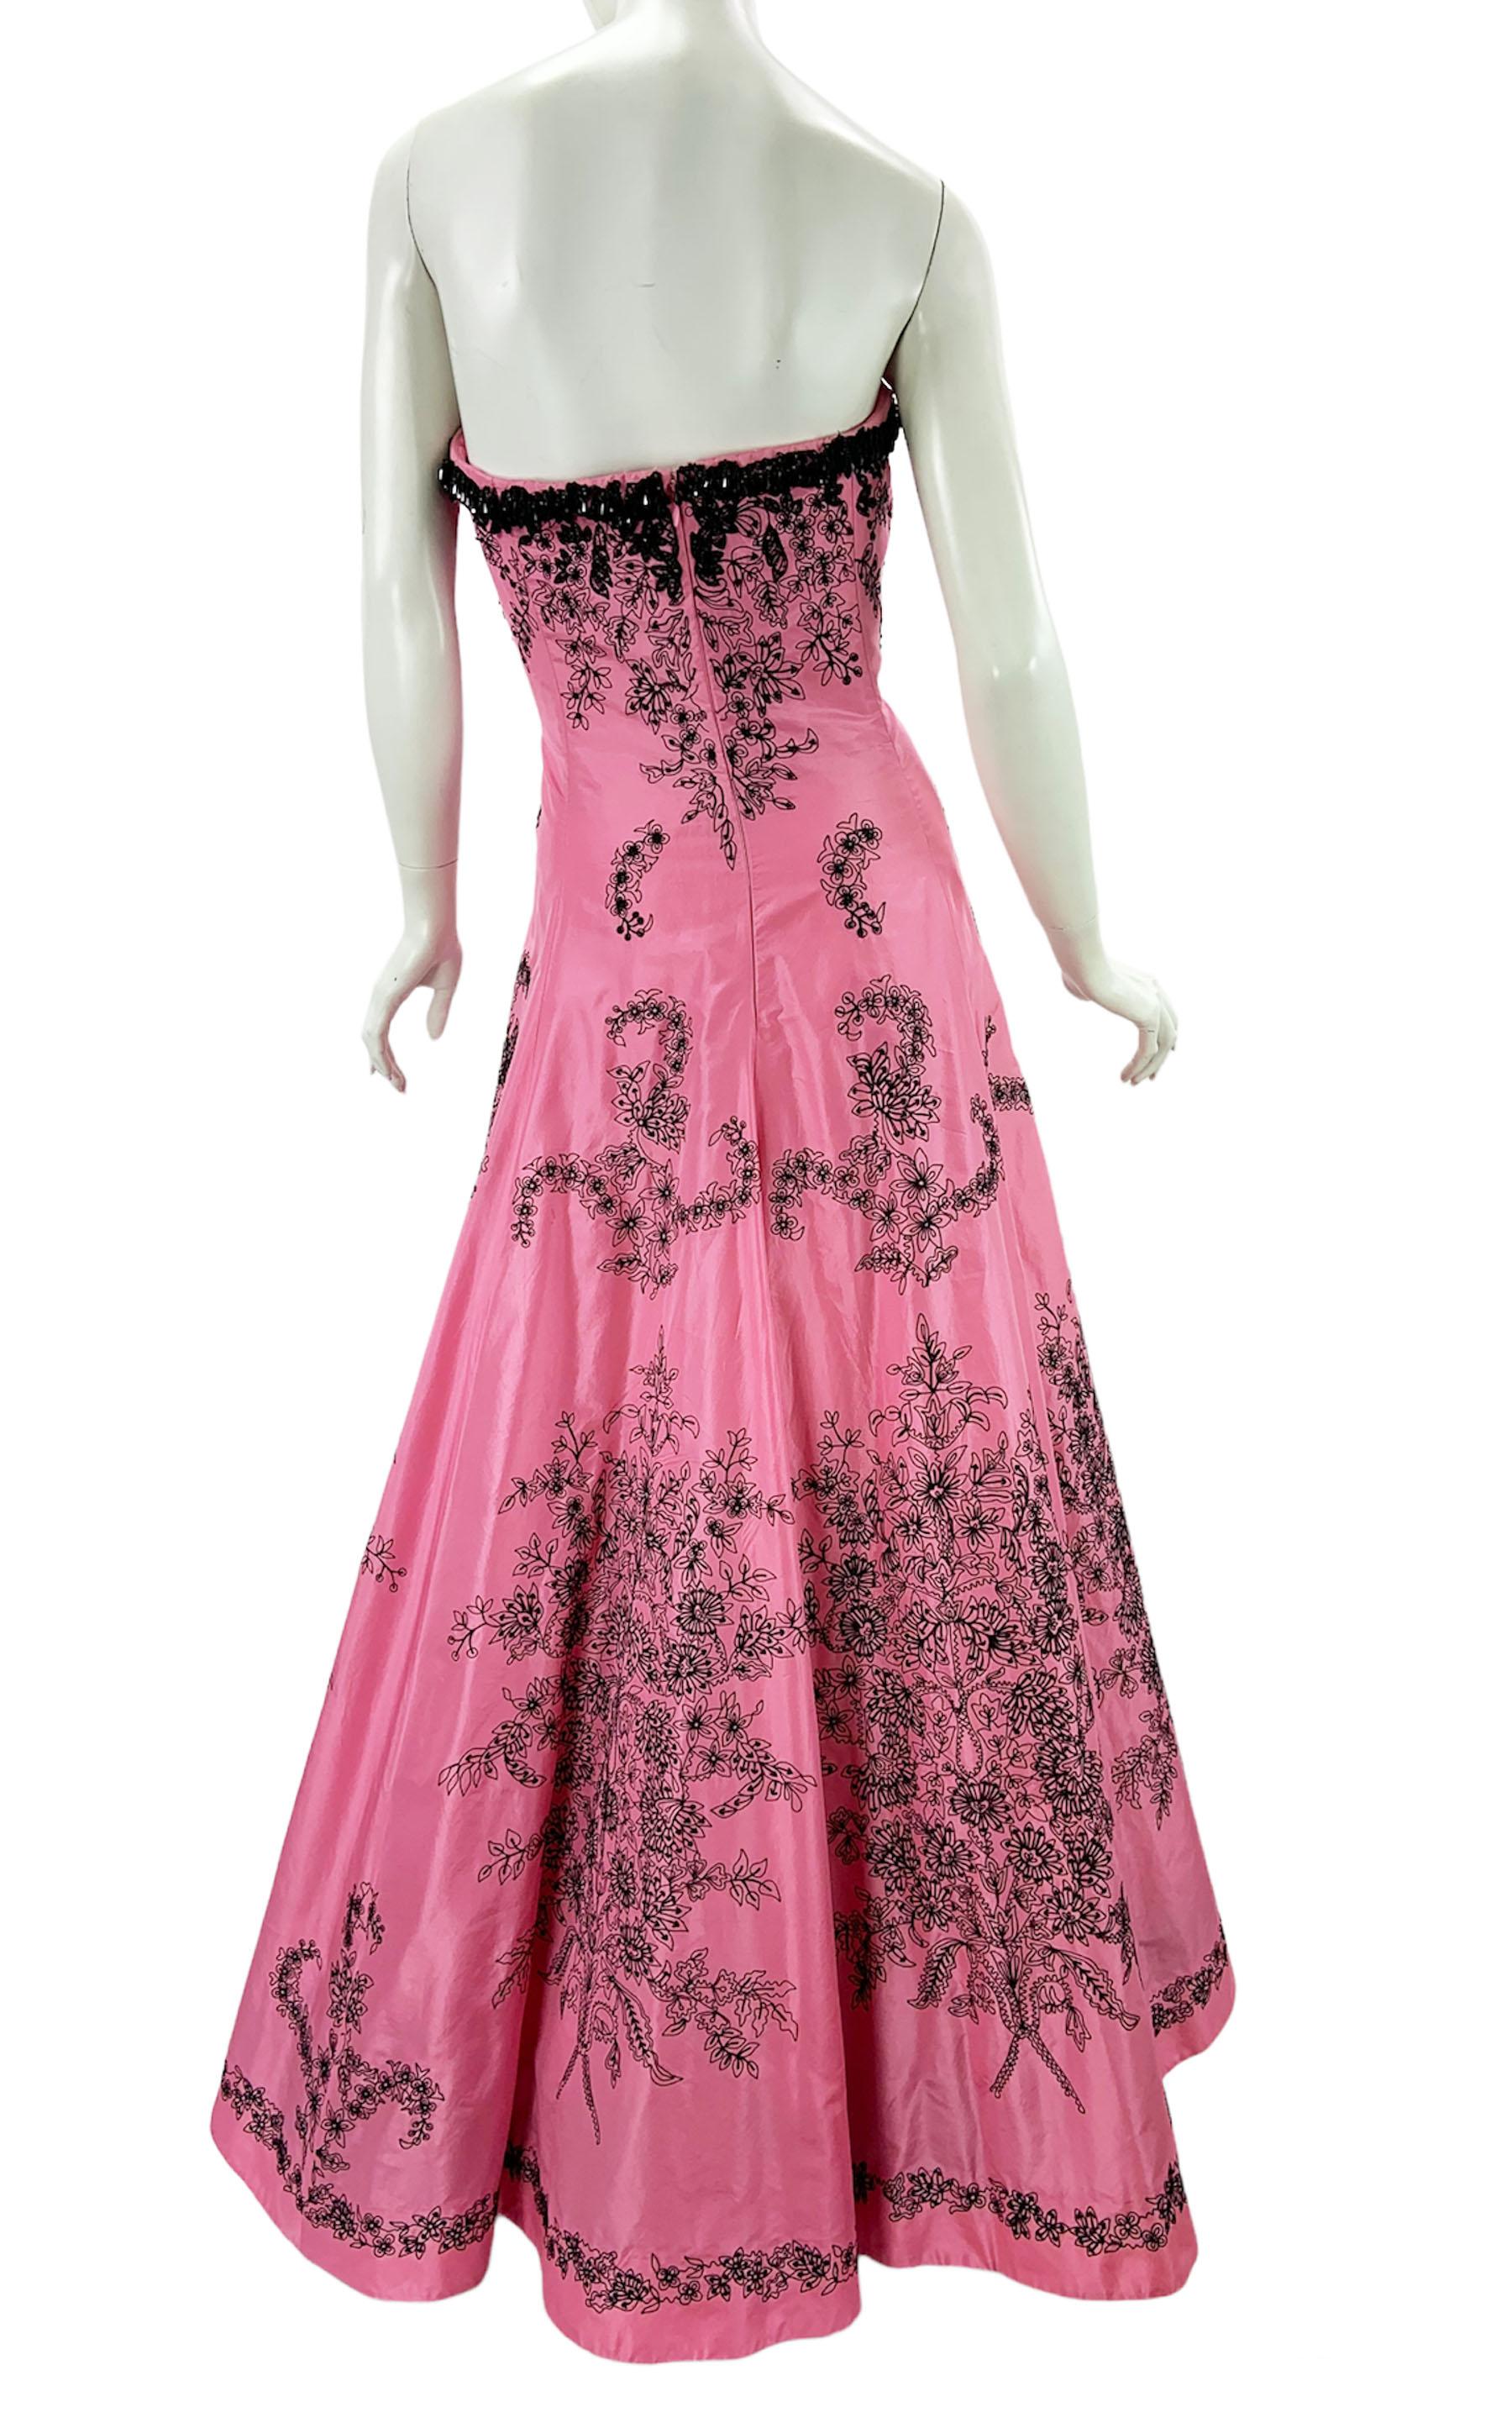 Oscar de la Renta S/S 2004 Collection Pink Silk Taffeta Embellished Dress Gown 8 In Excellent Condition For Sale In Montgomery, TX